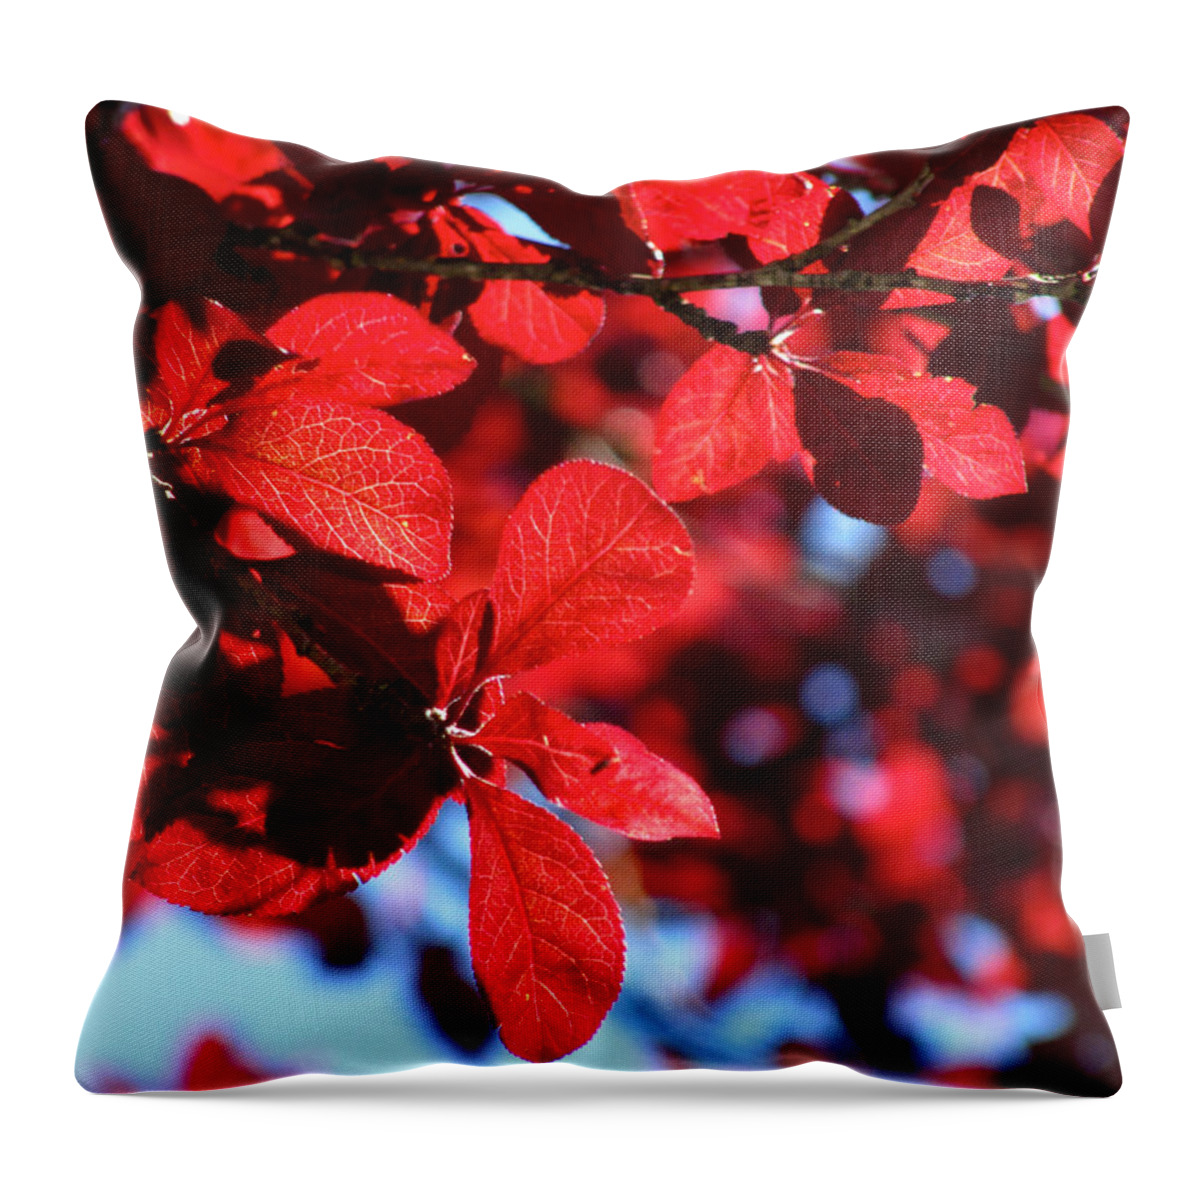 Cml Brown Throw Pillow featuring the photograph Plum Tree Cloudy Blue Sky 2 by CML Brown